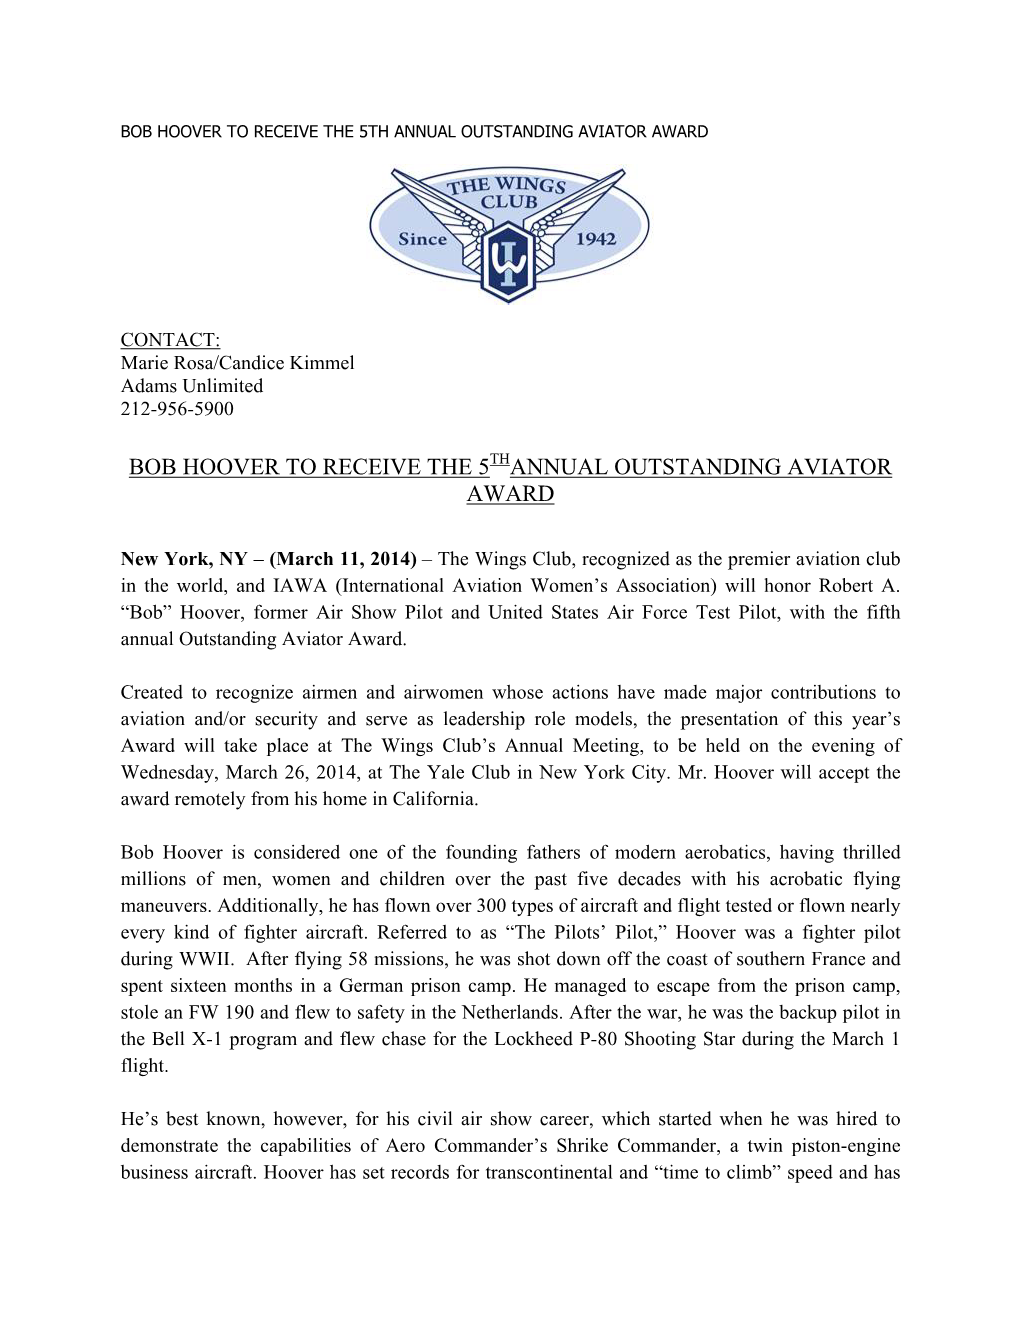 Bob Hoover to Receive the 5 Annual Outstanding Aviator